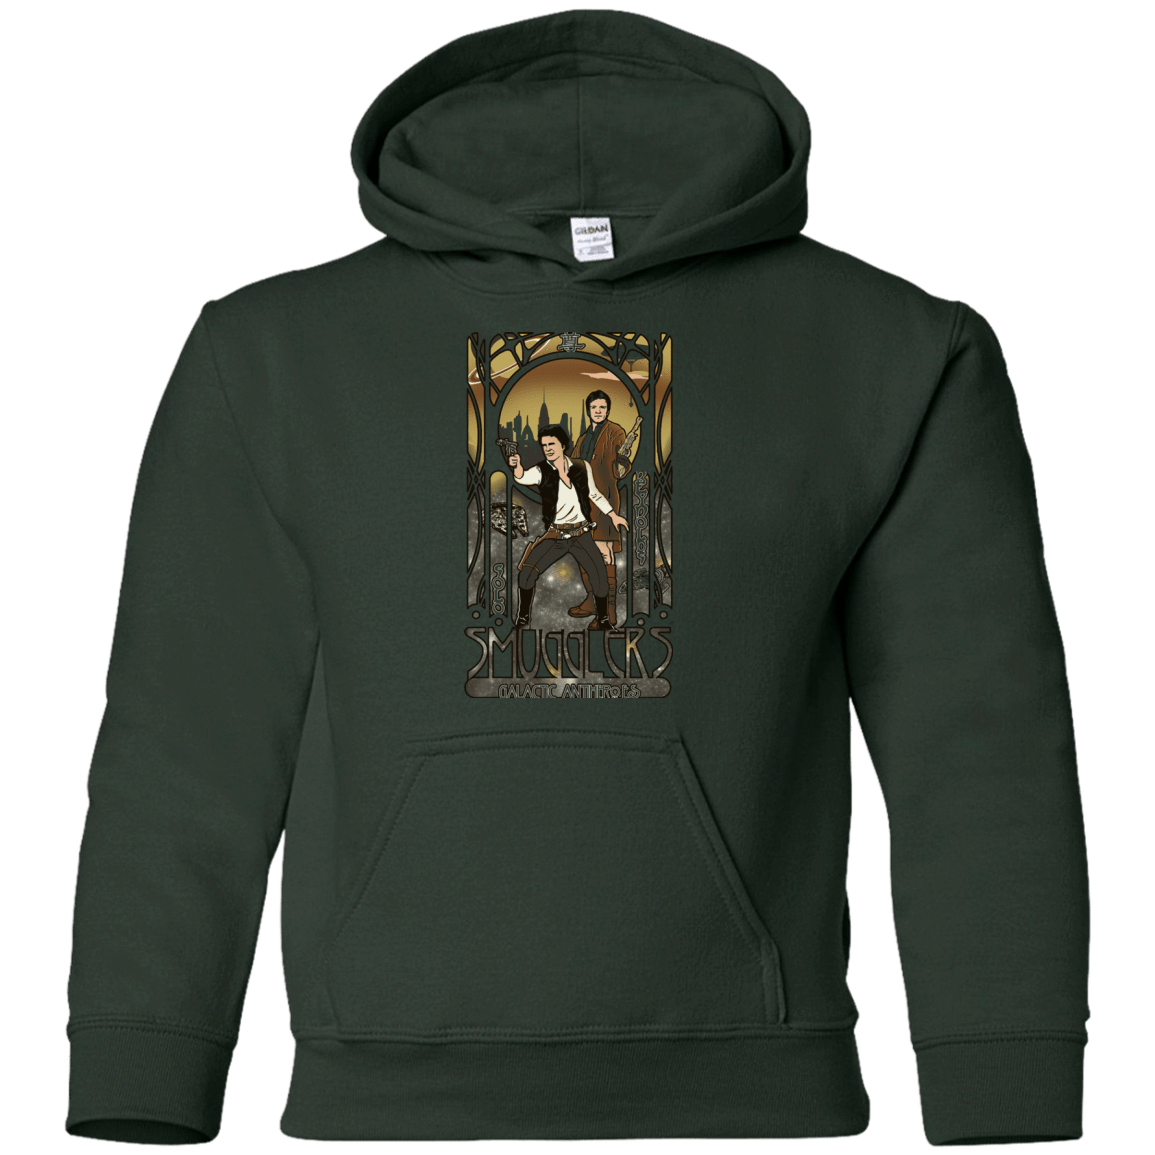 Sweatshirts Forest Green / YS Smugglers, Inc Youth Hoodie